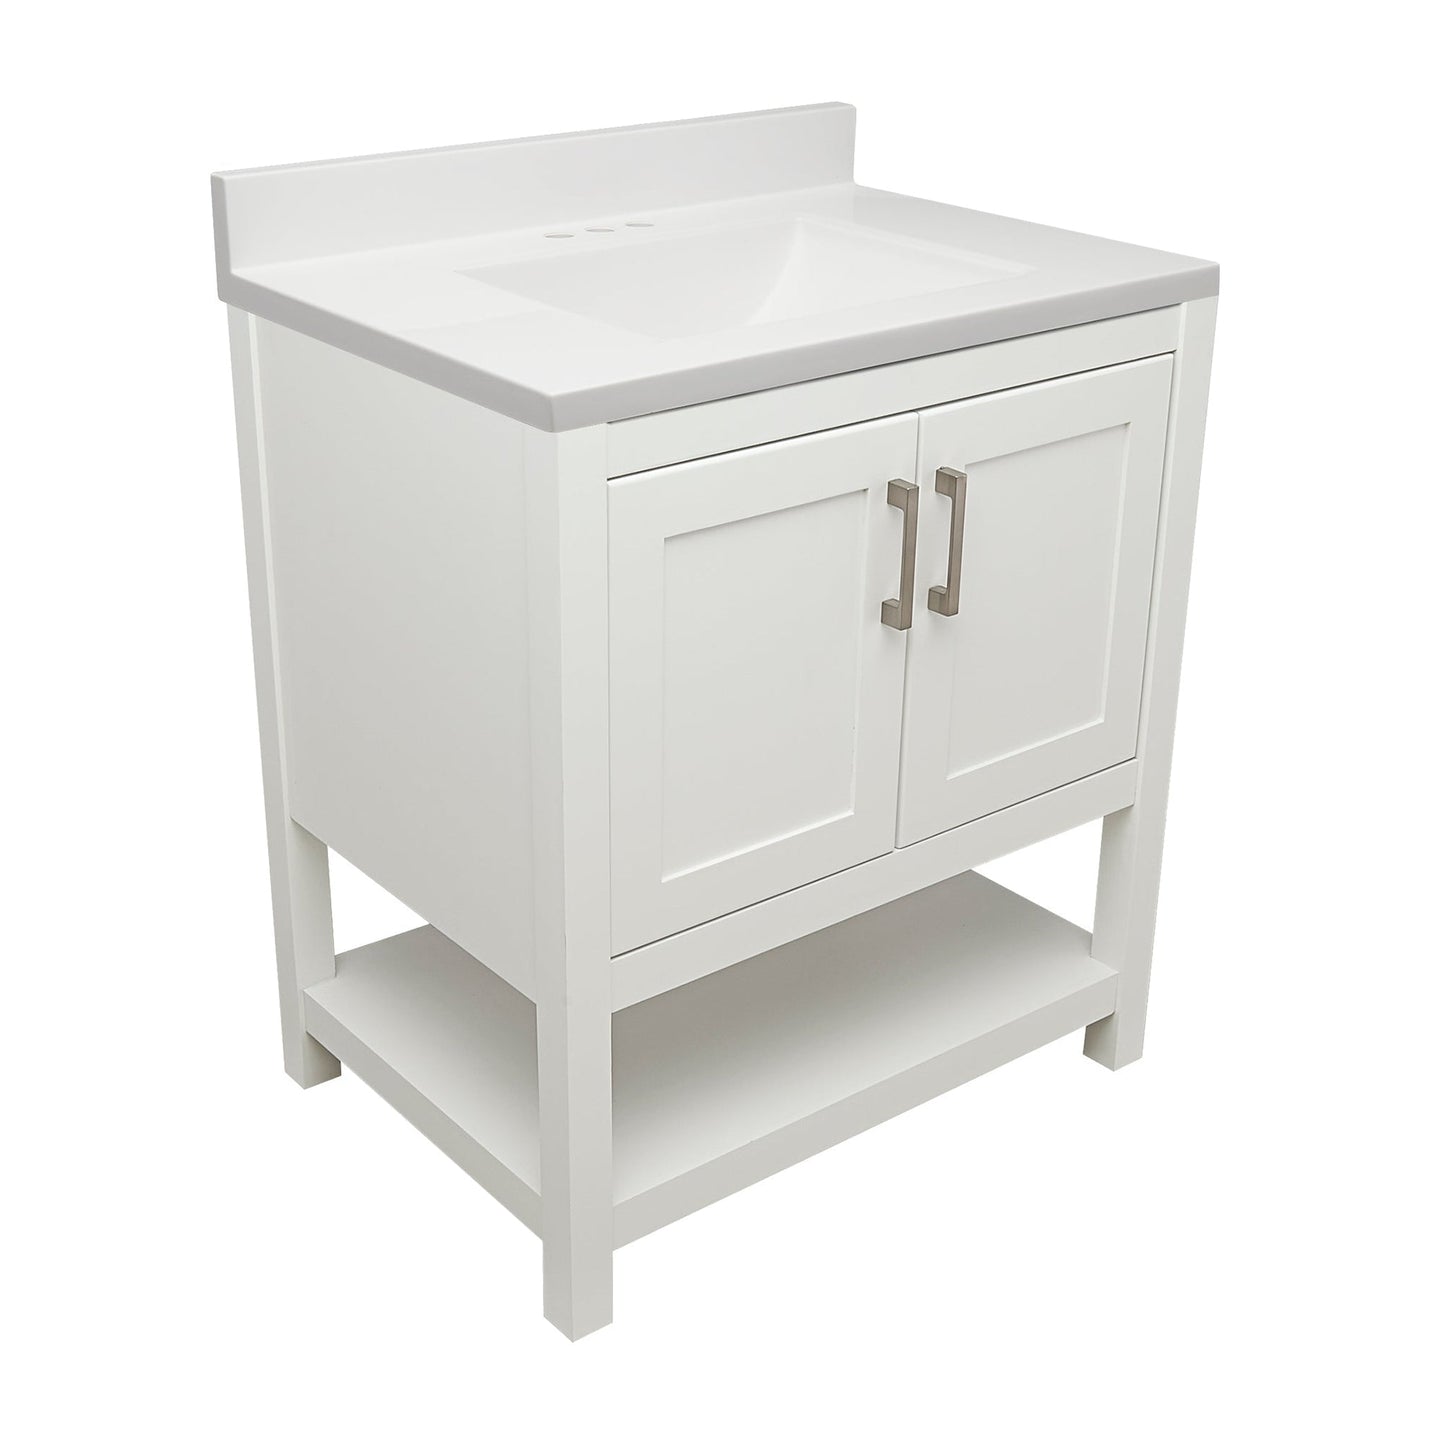 Ella's Bubbles Taos 31" White Bathroom Vanity With White Cultured Marble Top With White Backsplash and Sink